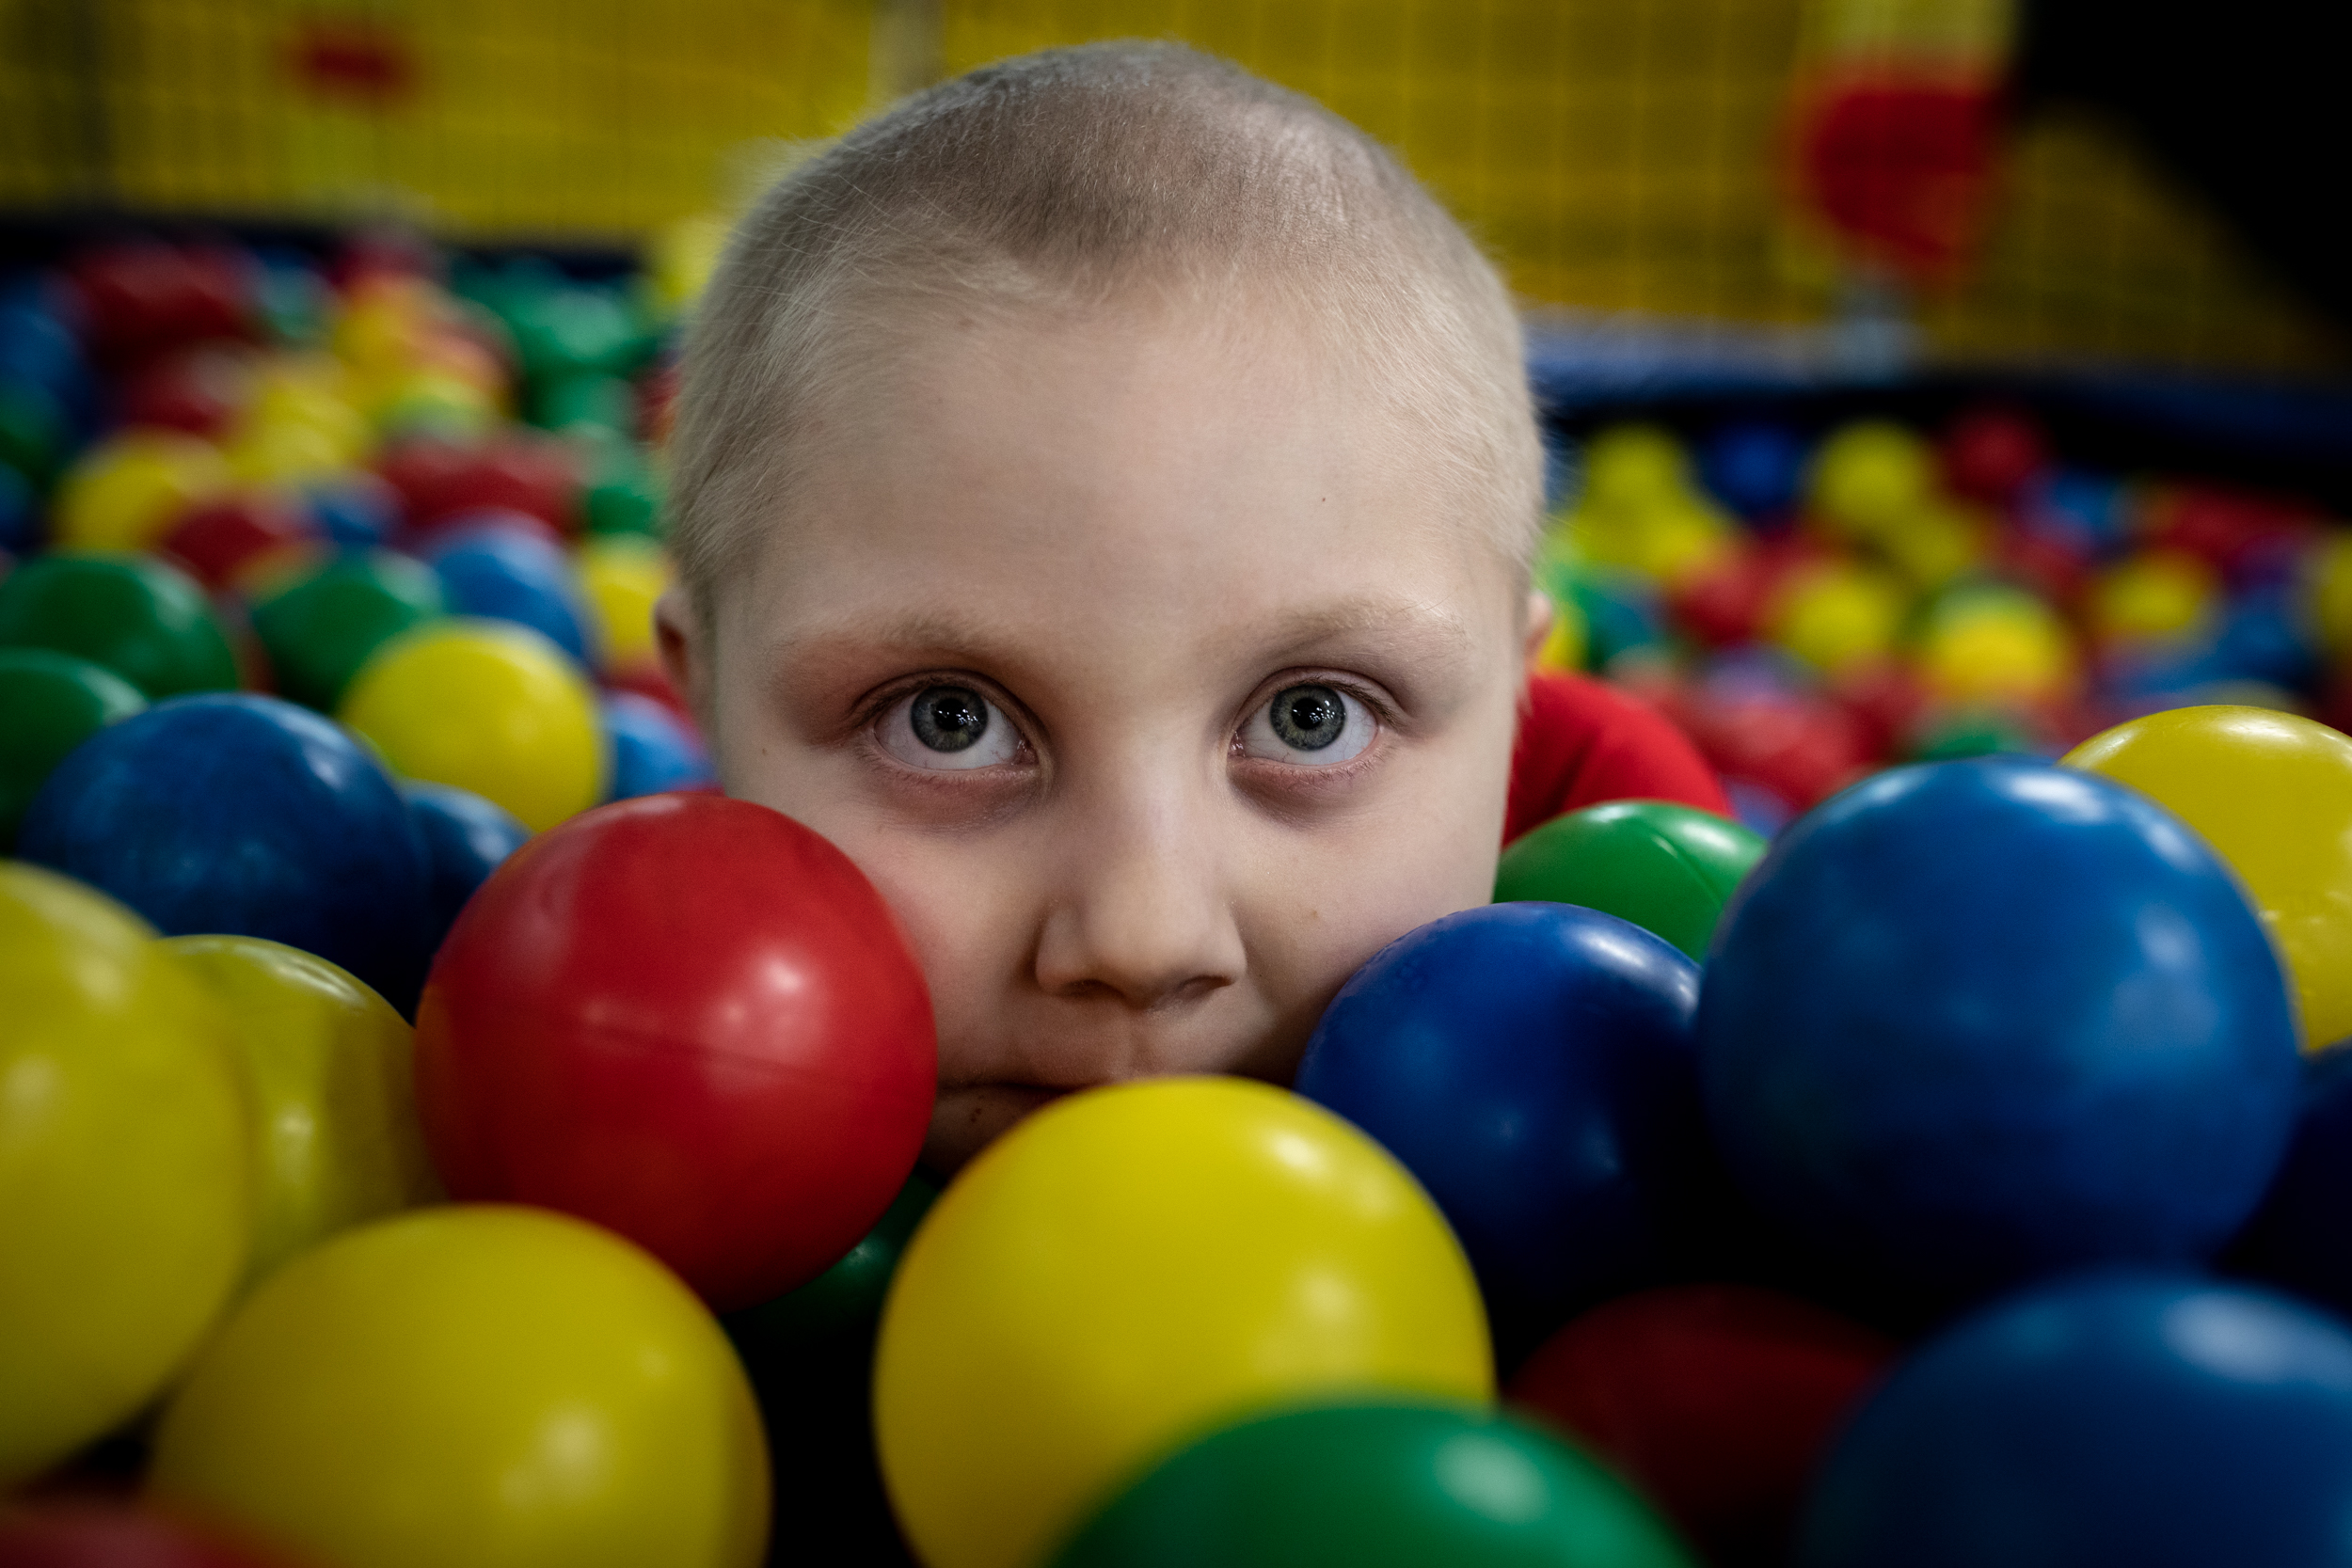 Kaylee Marshfield in a ball pit in February 2019, celebrating her seventh birthday. It was a happy occasion, unlike her sixth birthday, when she was diagnosed with cancer.